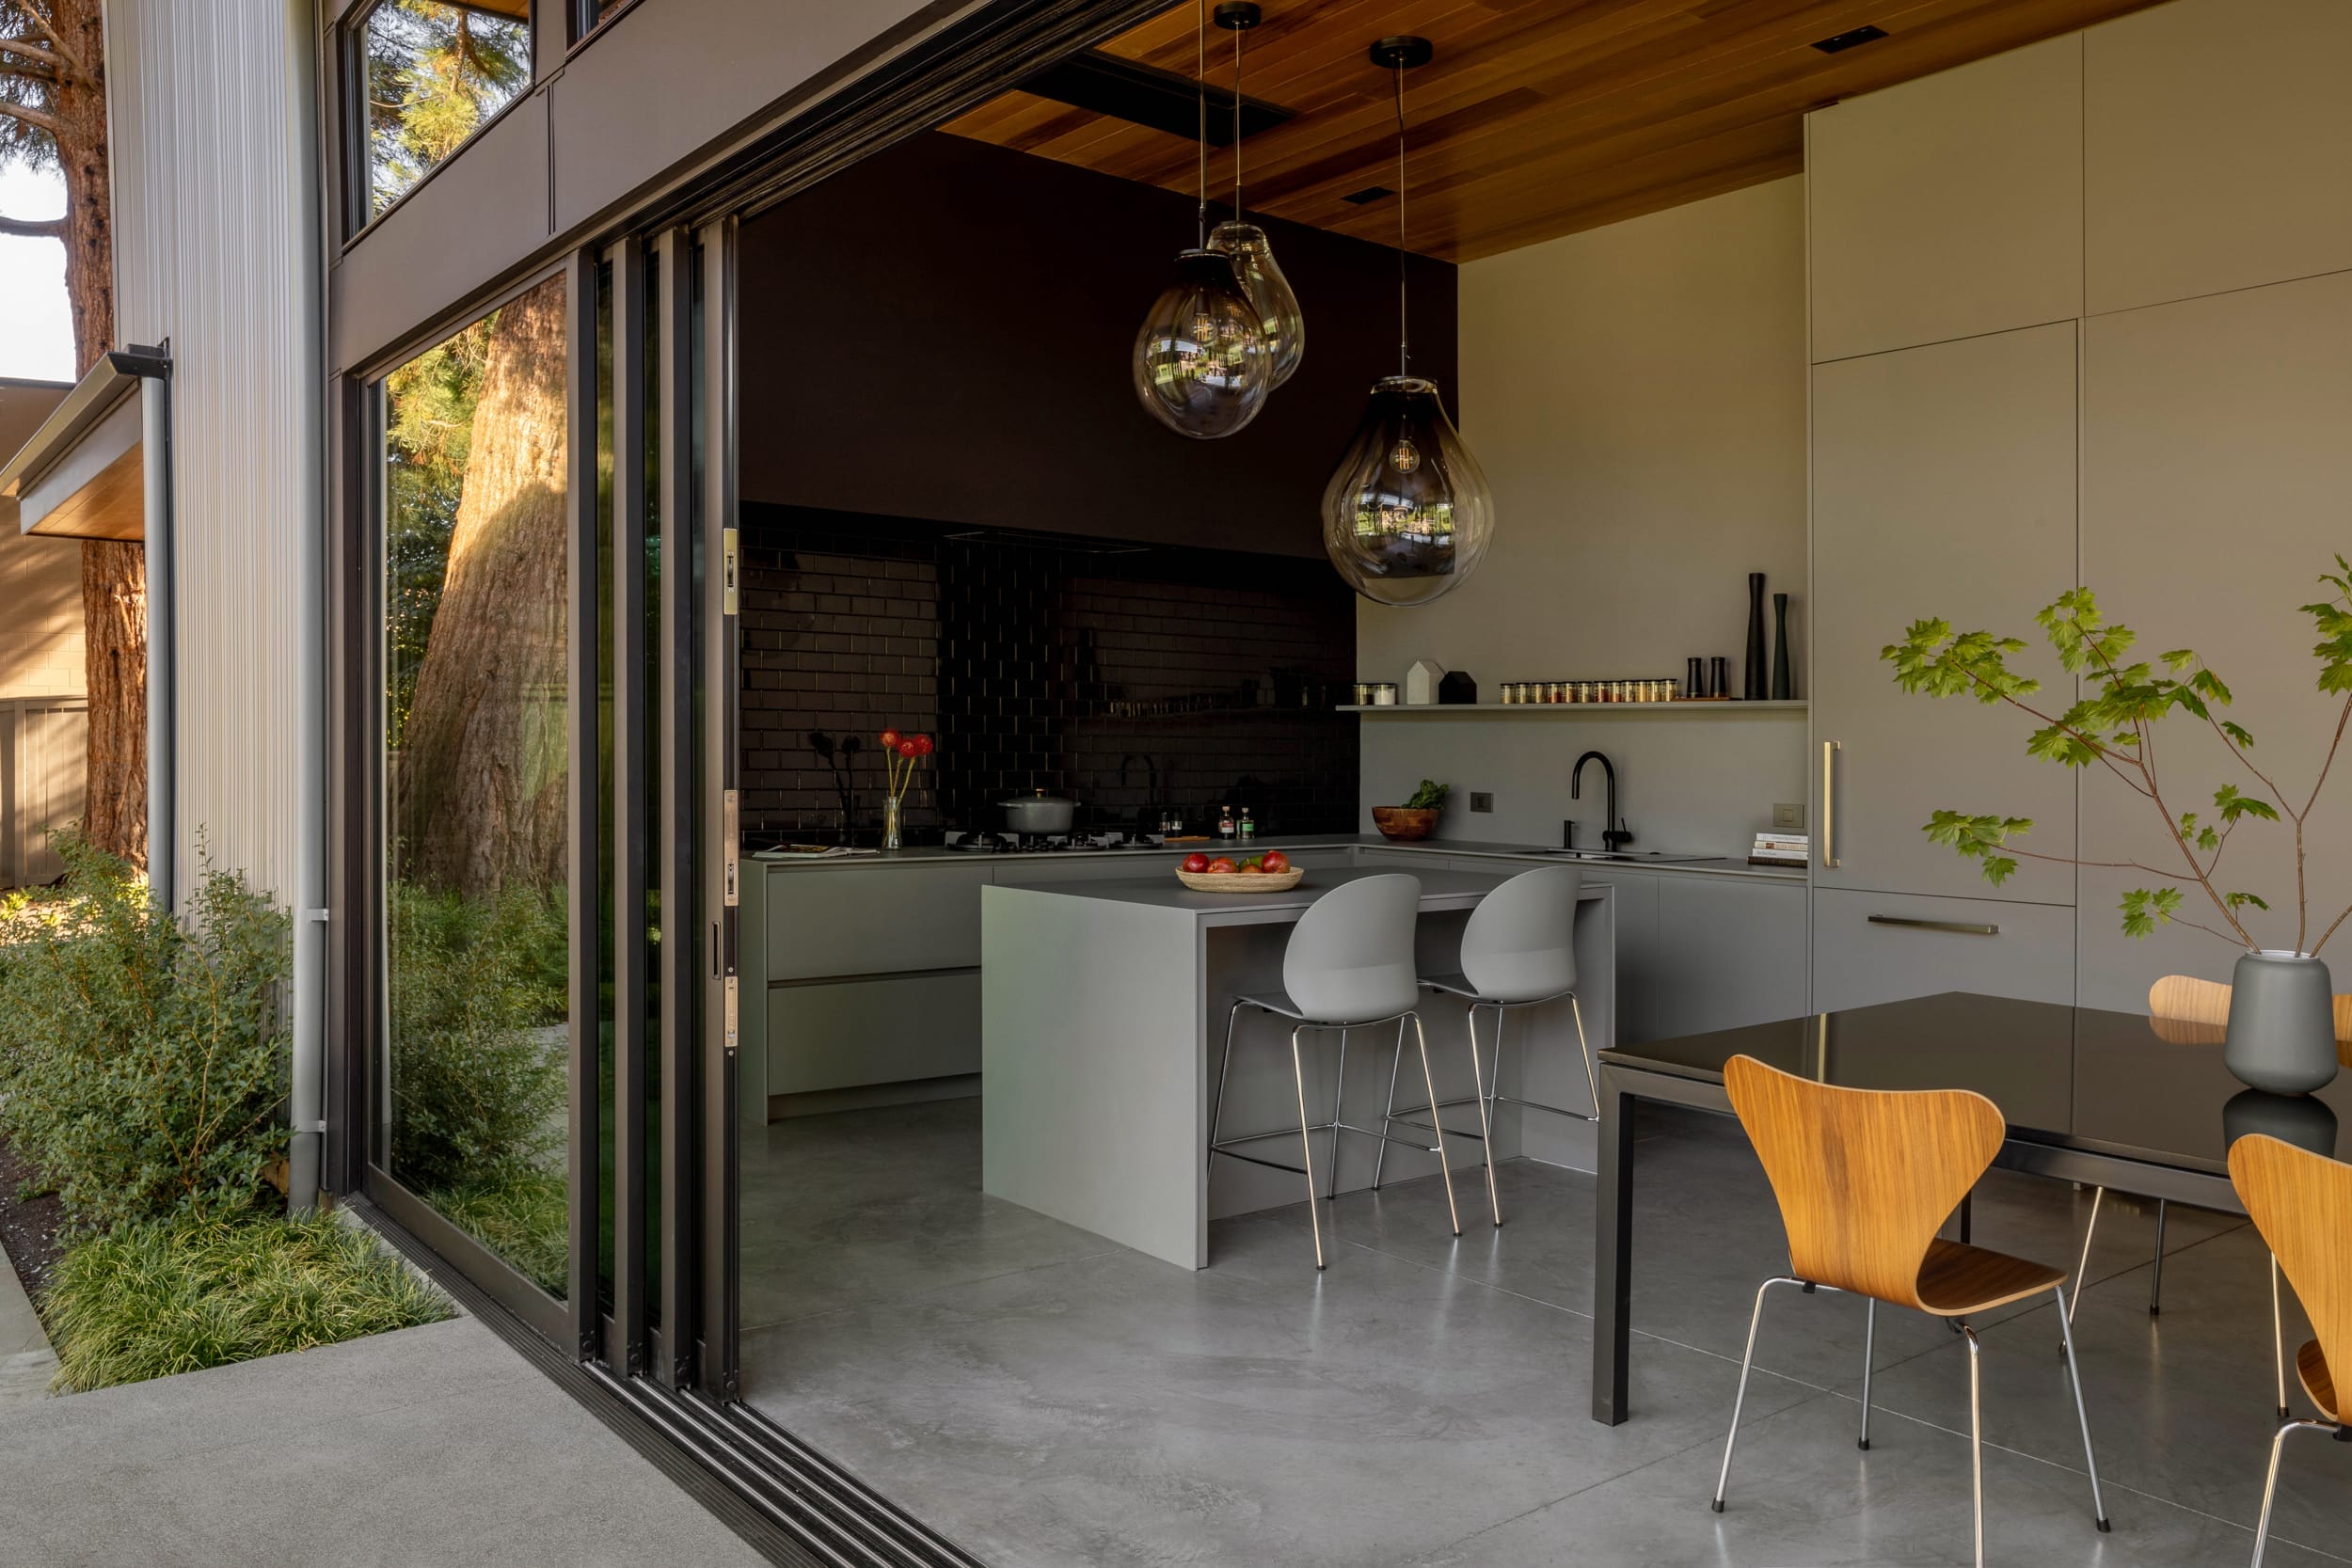 A modern kitchen and dining area with sliding glass doors, perfect for a floating home.